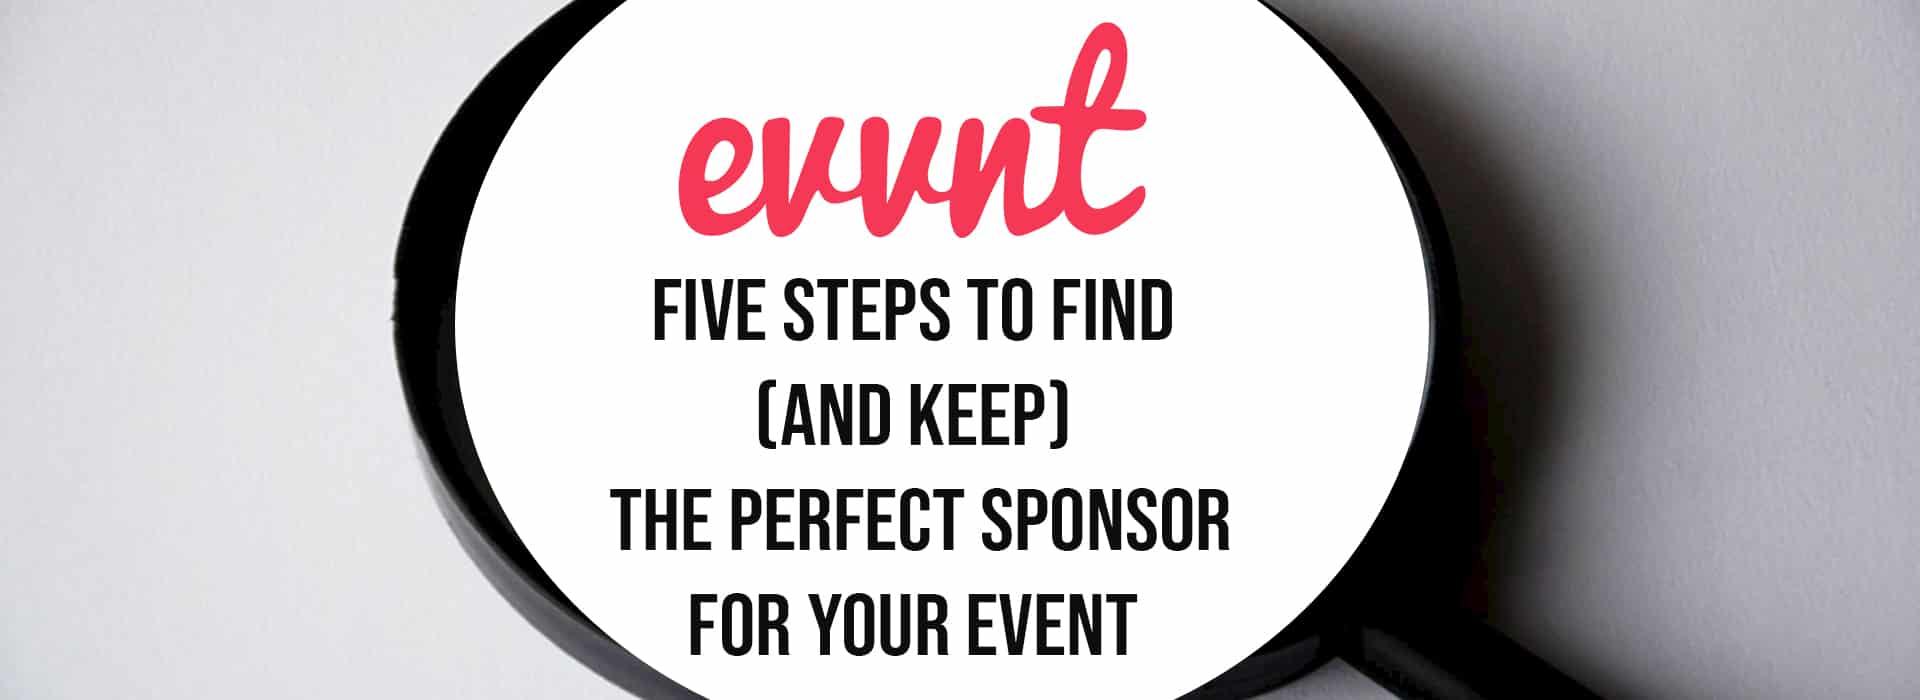 Five Steps to Find and Keep The Perfect Sponsor for Your Event